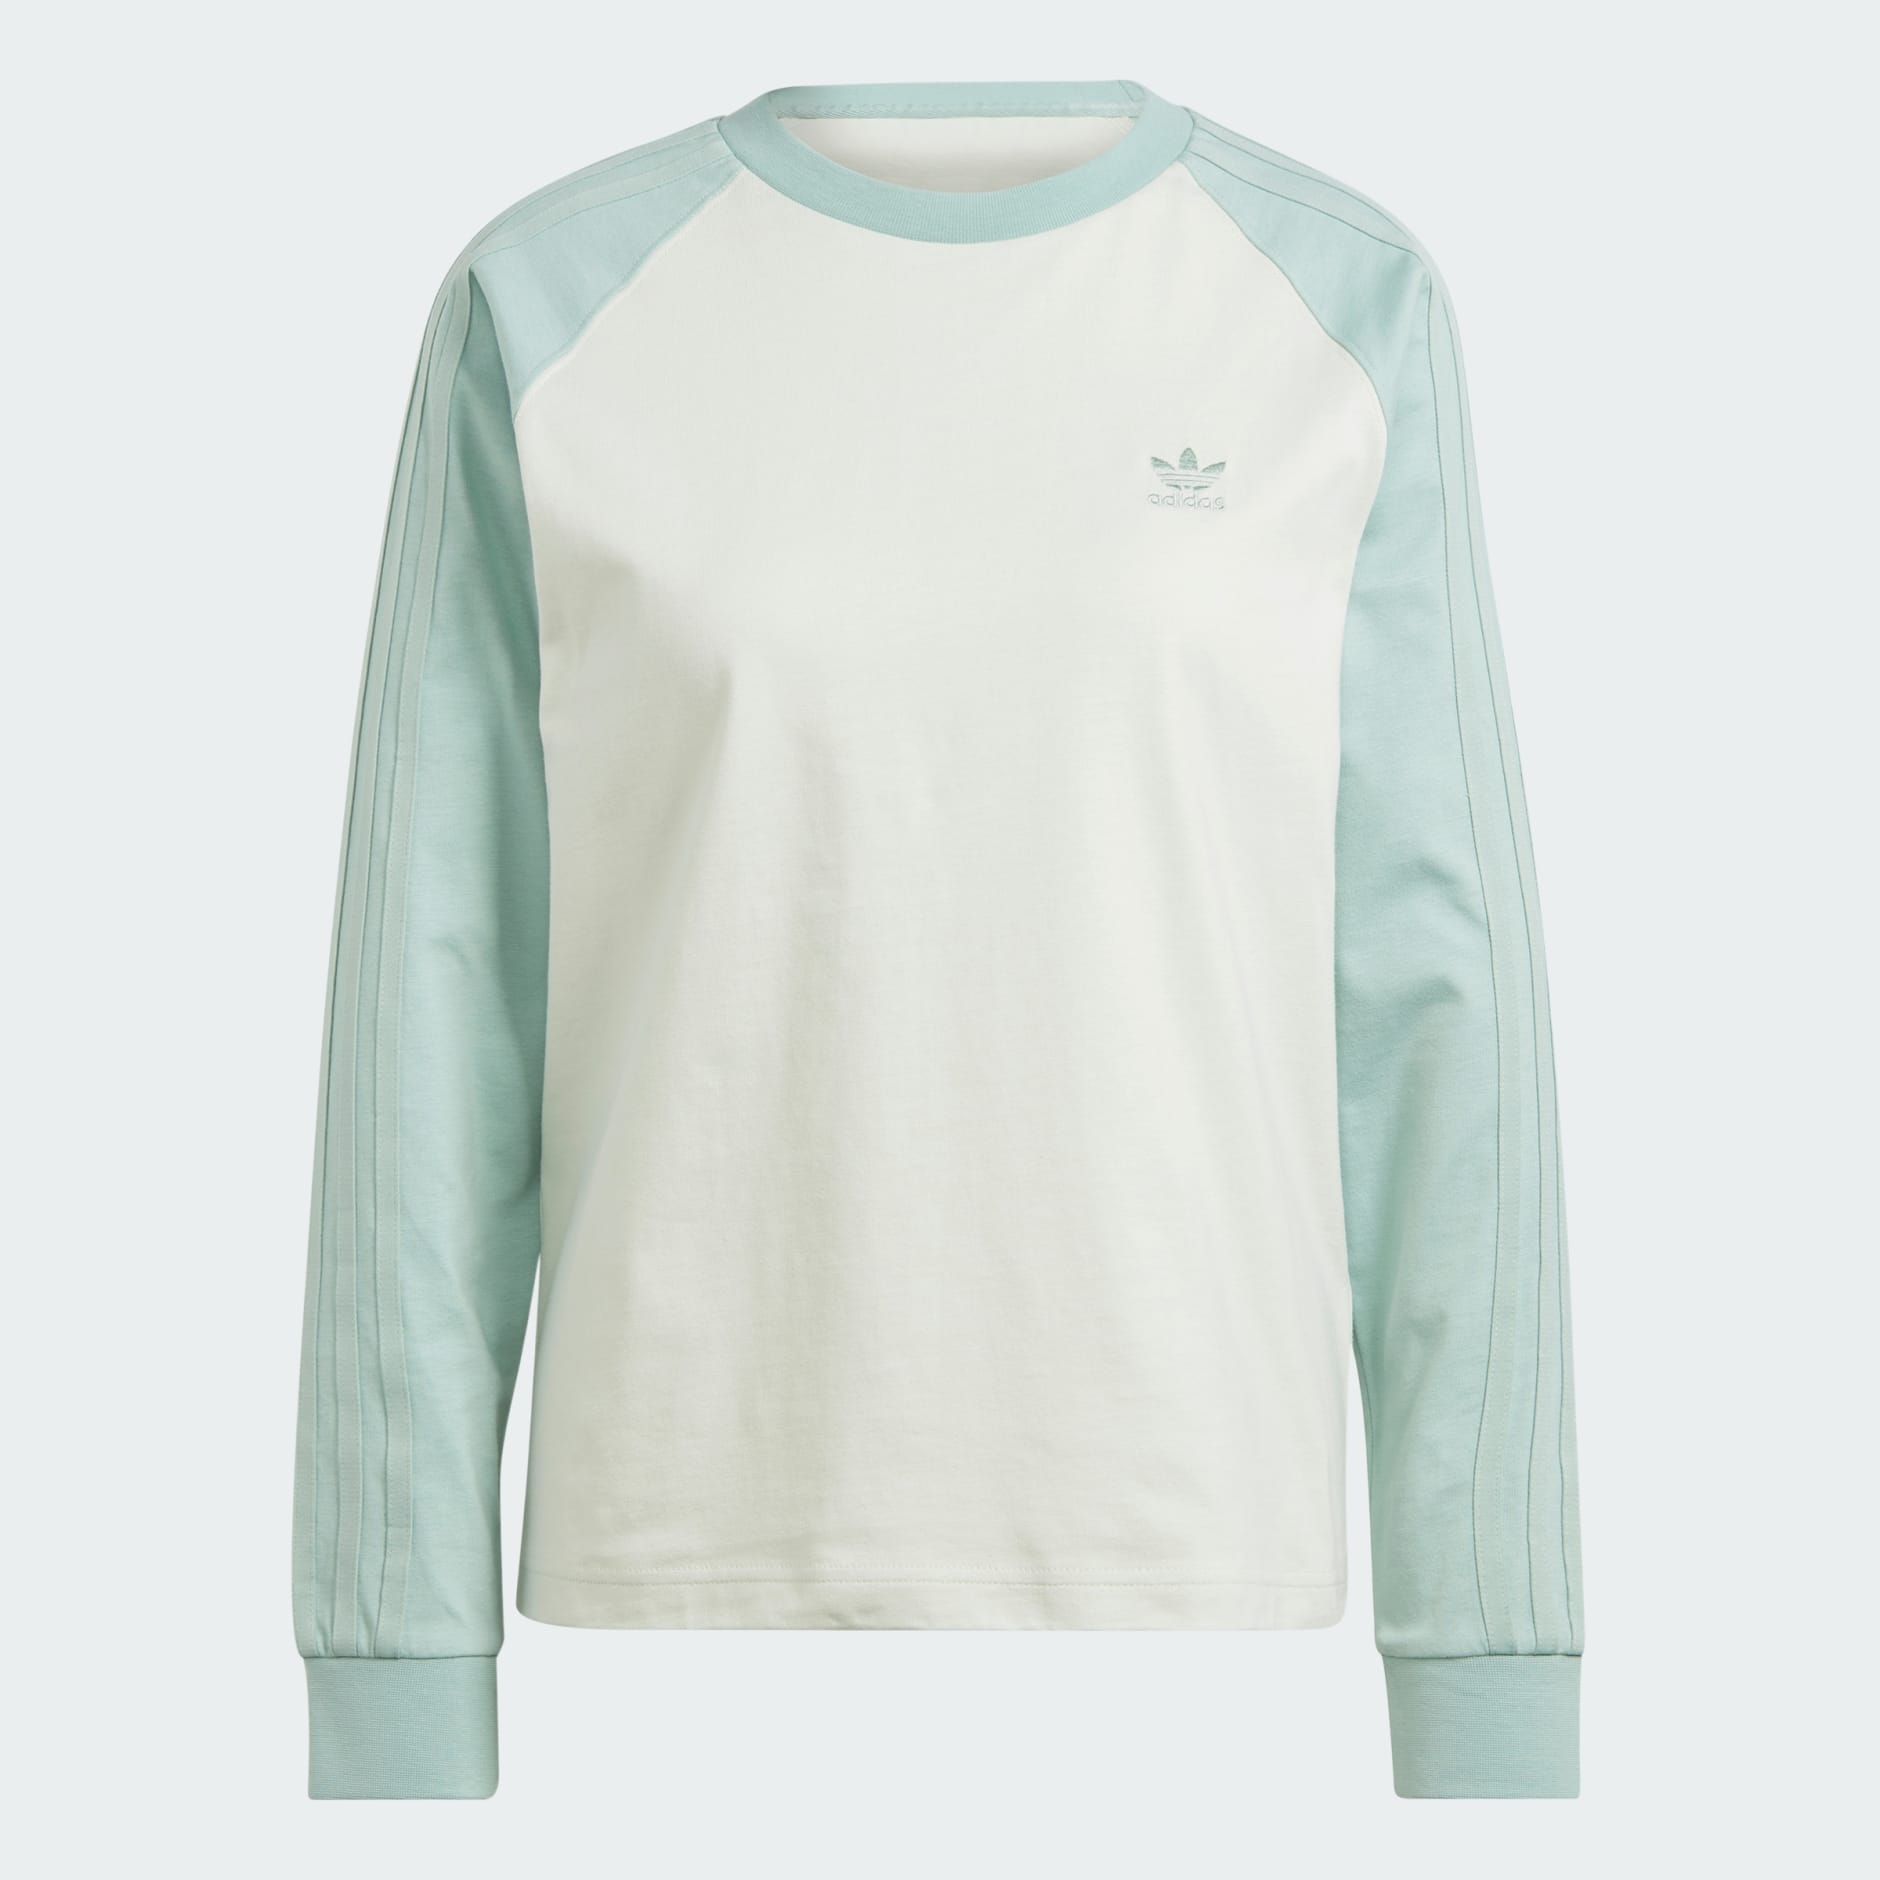 Clothing - Long Sleeve Tee - Green | adidas South Africa